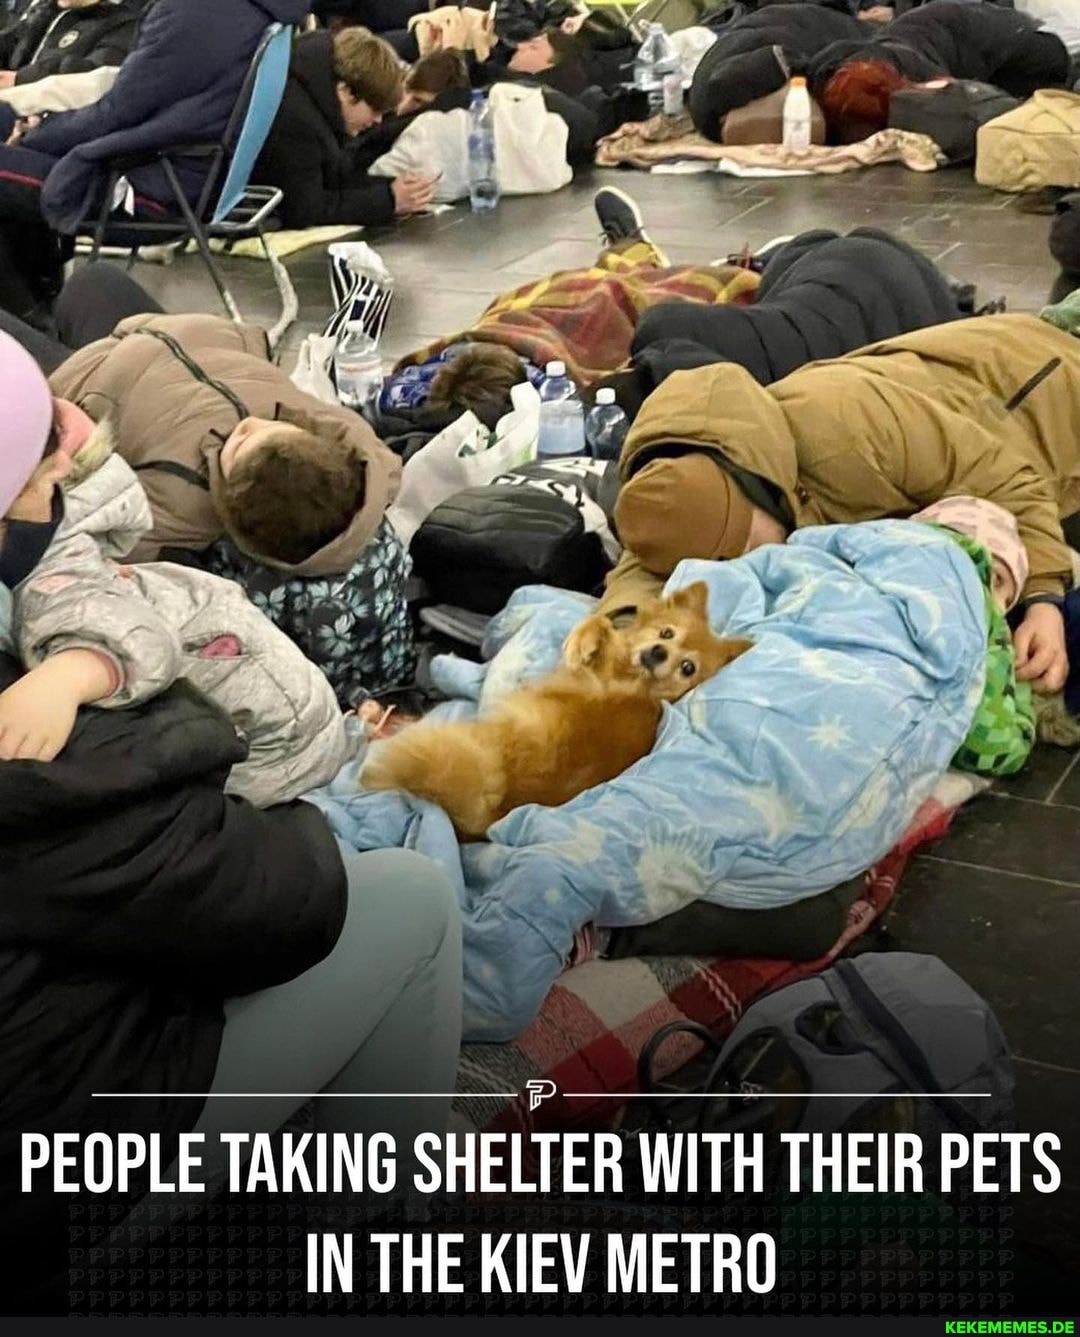 PEOPLE TAKING SHELTER WITH THEIR PETS IN THE KIEV METRO